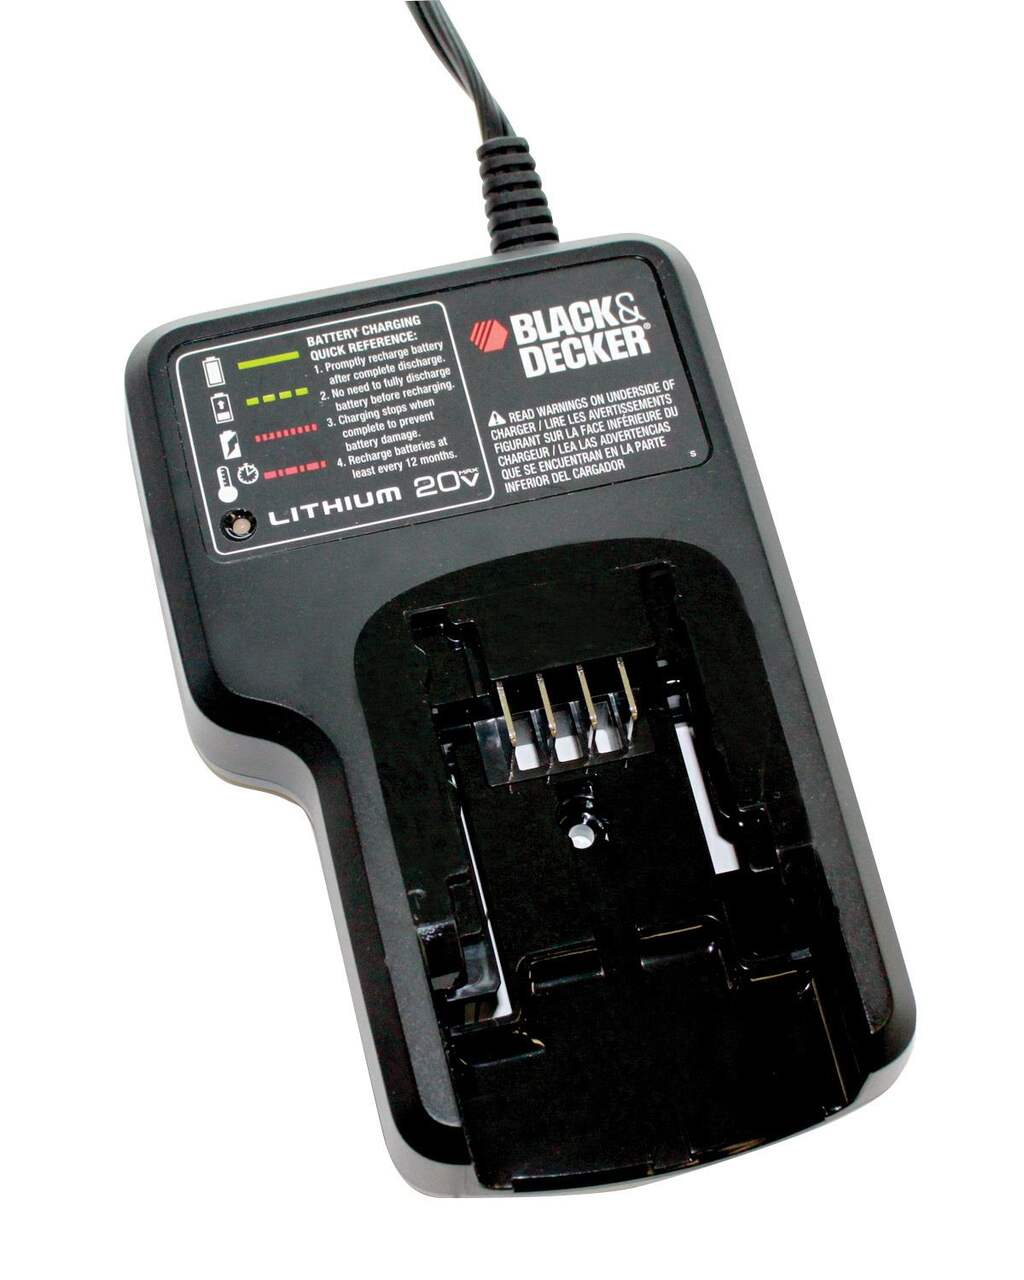 https://media-www.canadiantire.ca/product/fixing/tools/portable-power-tools/0542837/b-d-20v-lith-ion-charger-c33c7145-f593-4182-ba6d-dce8693bc6ef-jpgrendition.jpg?imdensity=1&imwidth=640&impolicy=mZoom